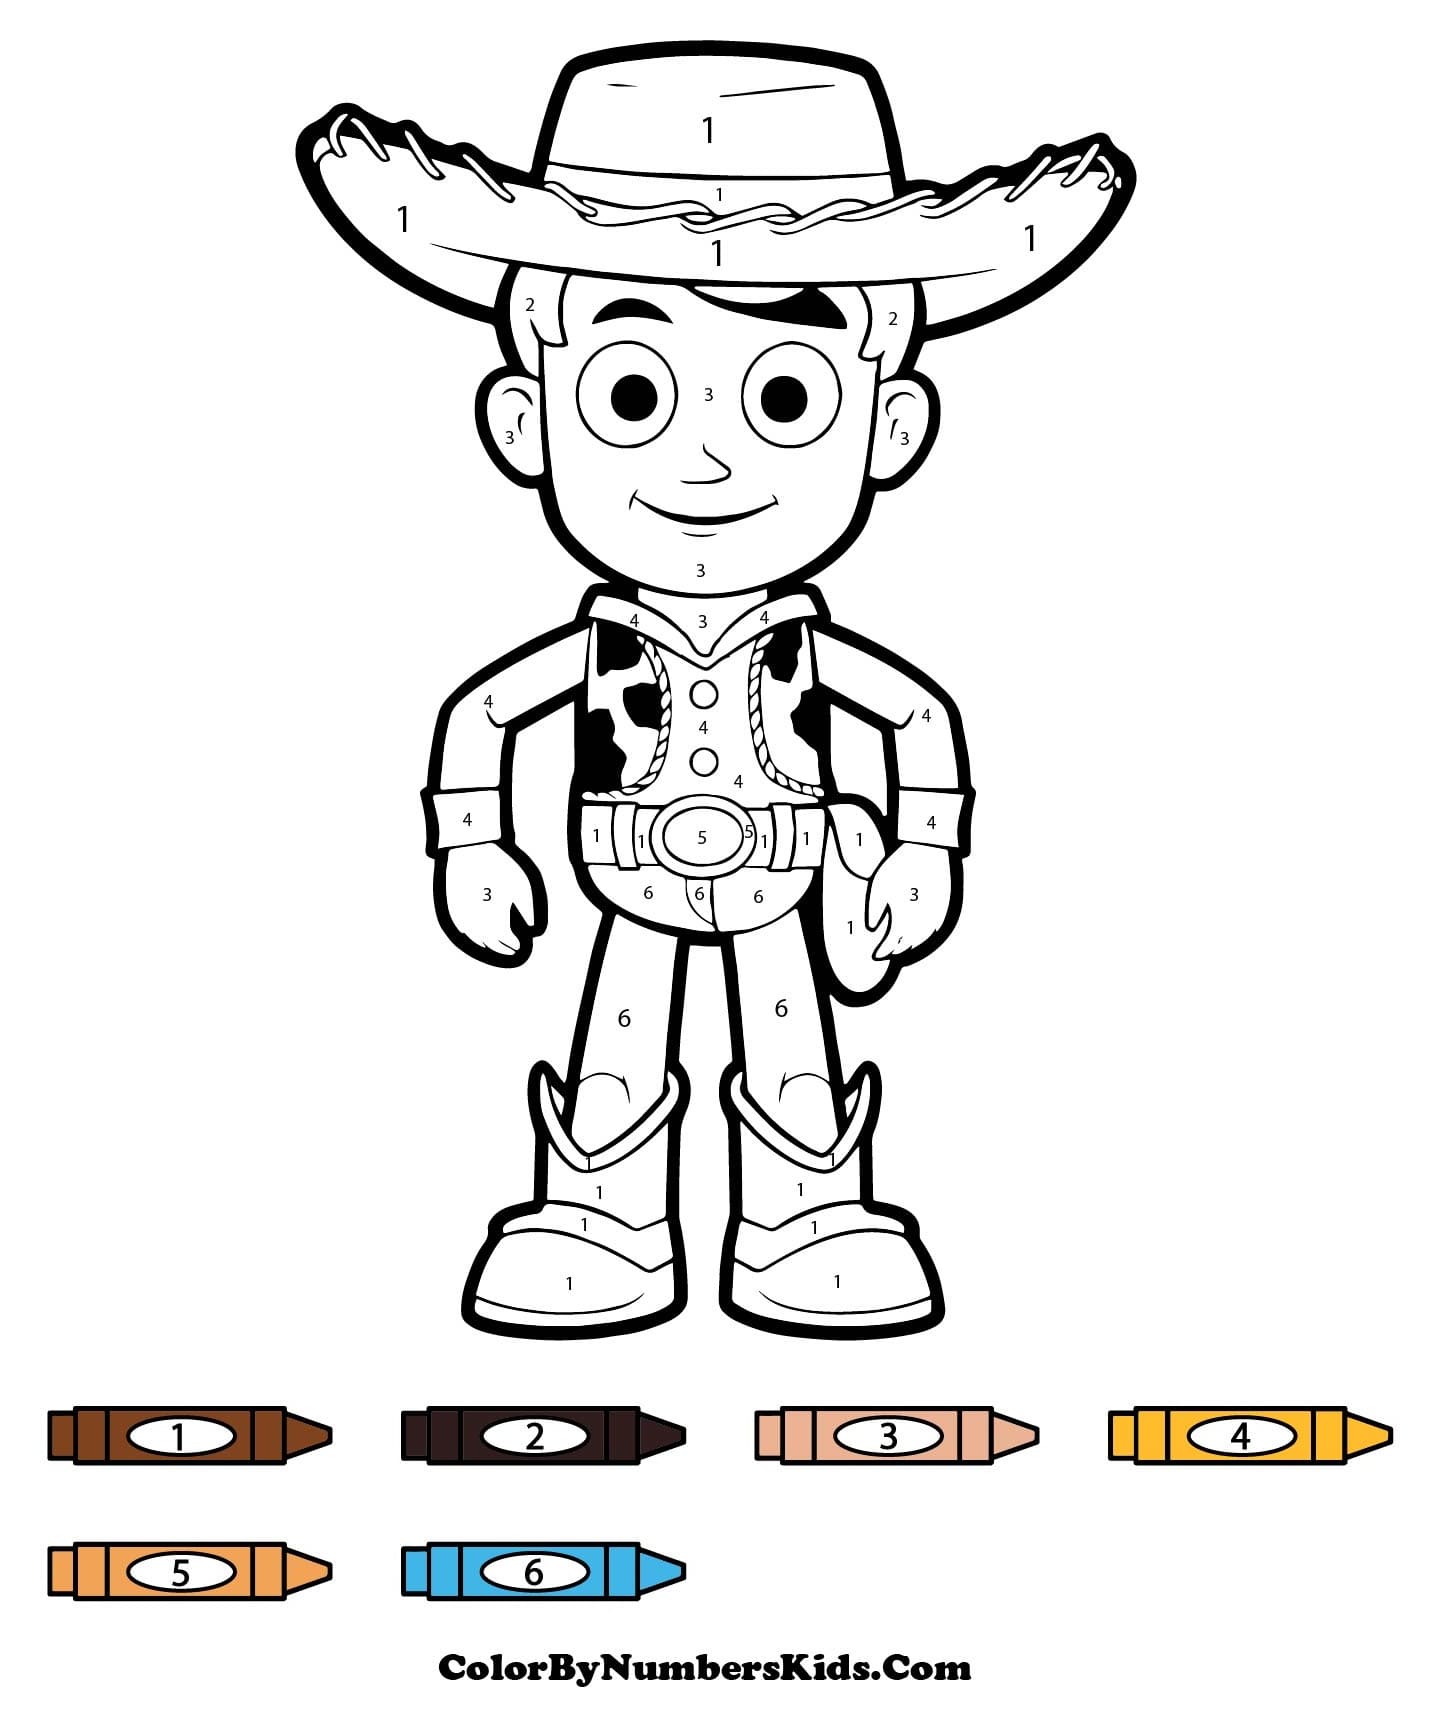 Woody in Toy Story Color By Number